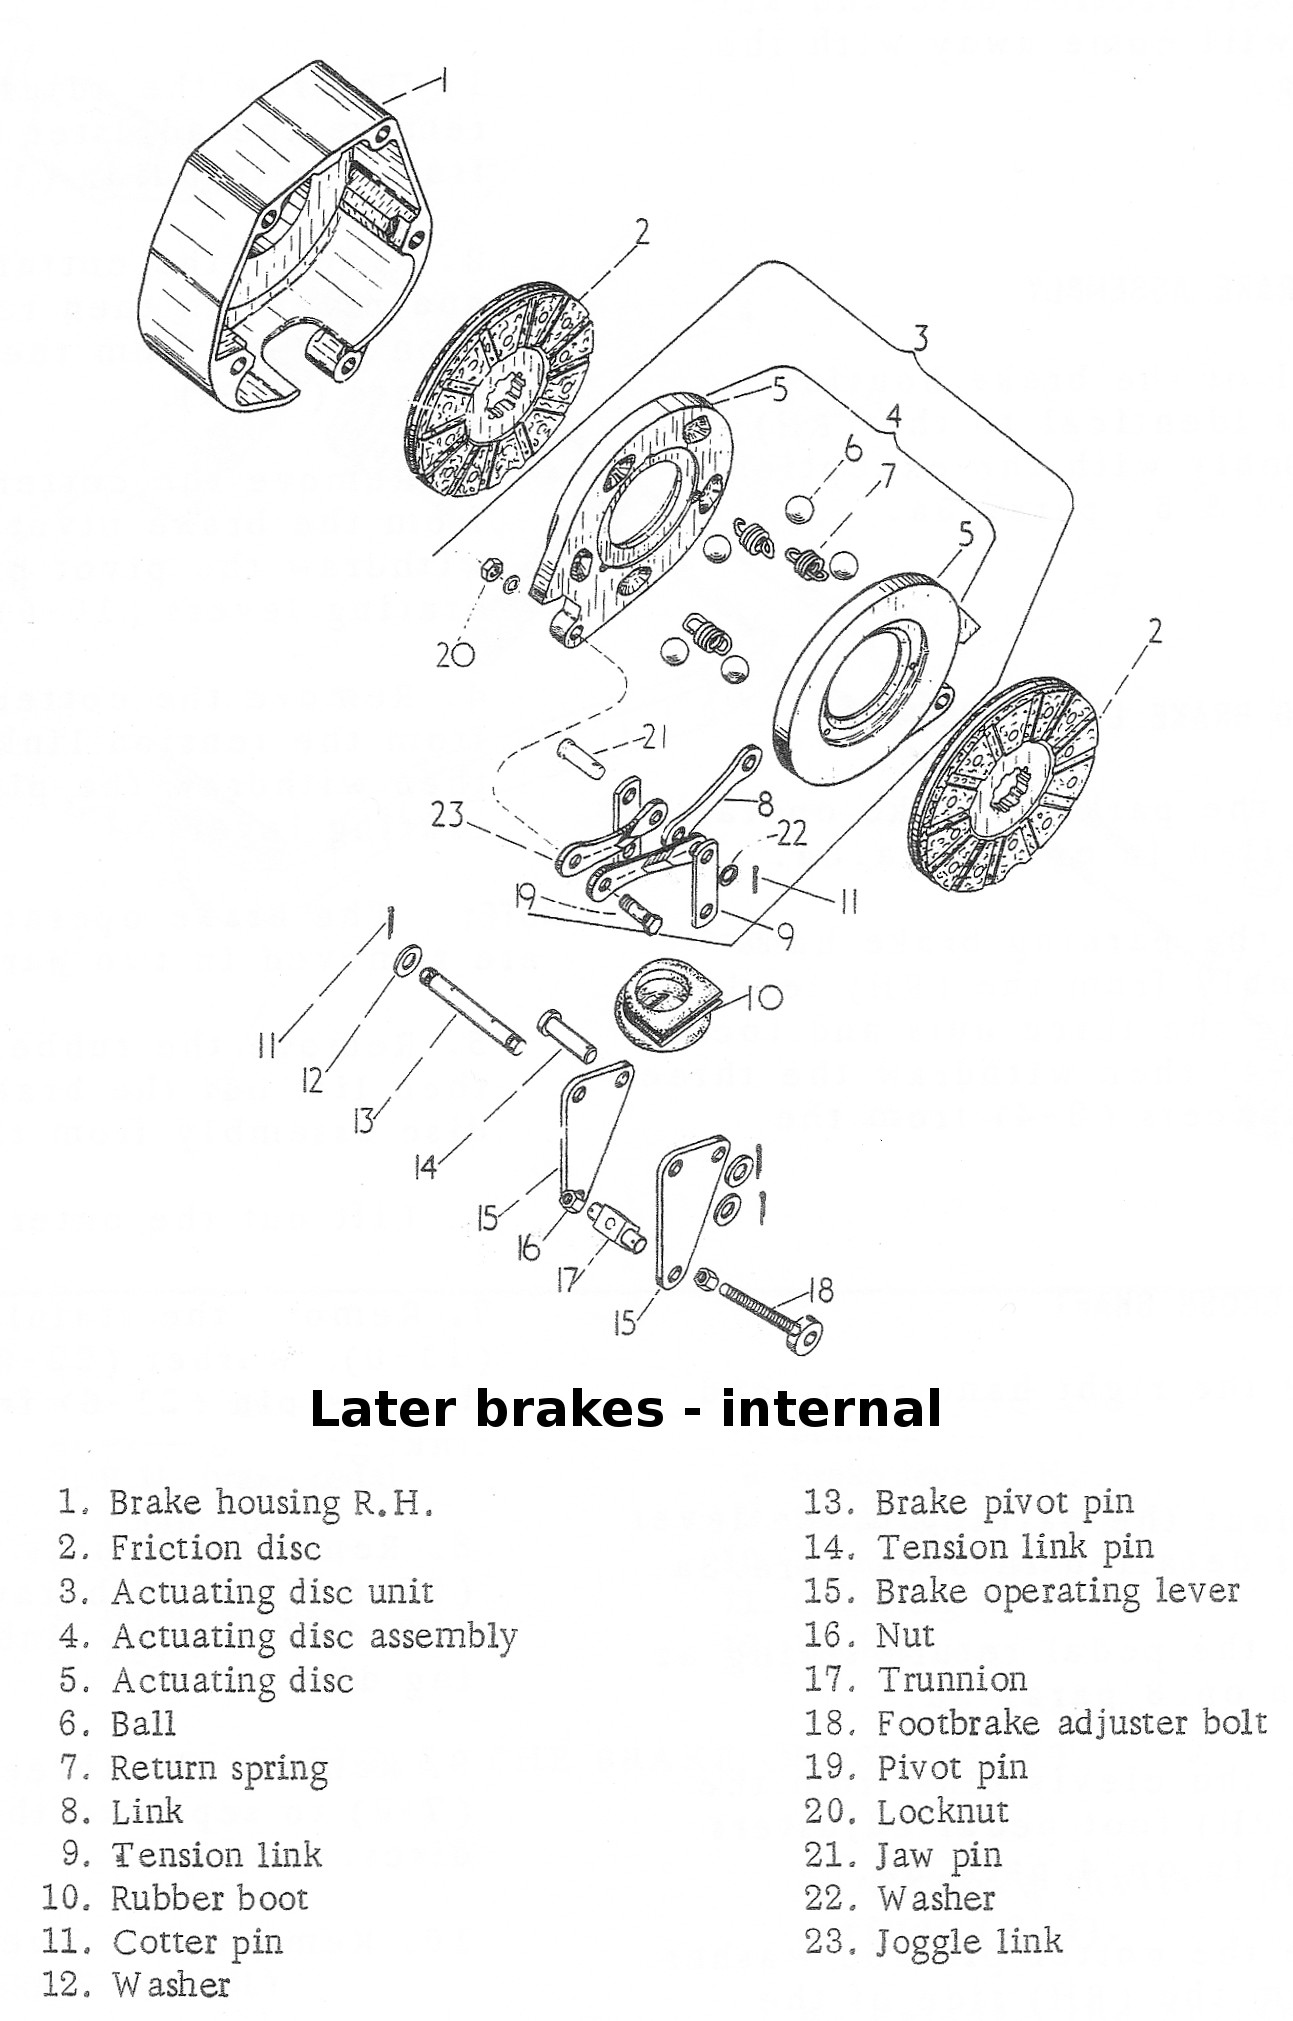 Later brakes - exploded parts diagram